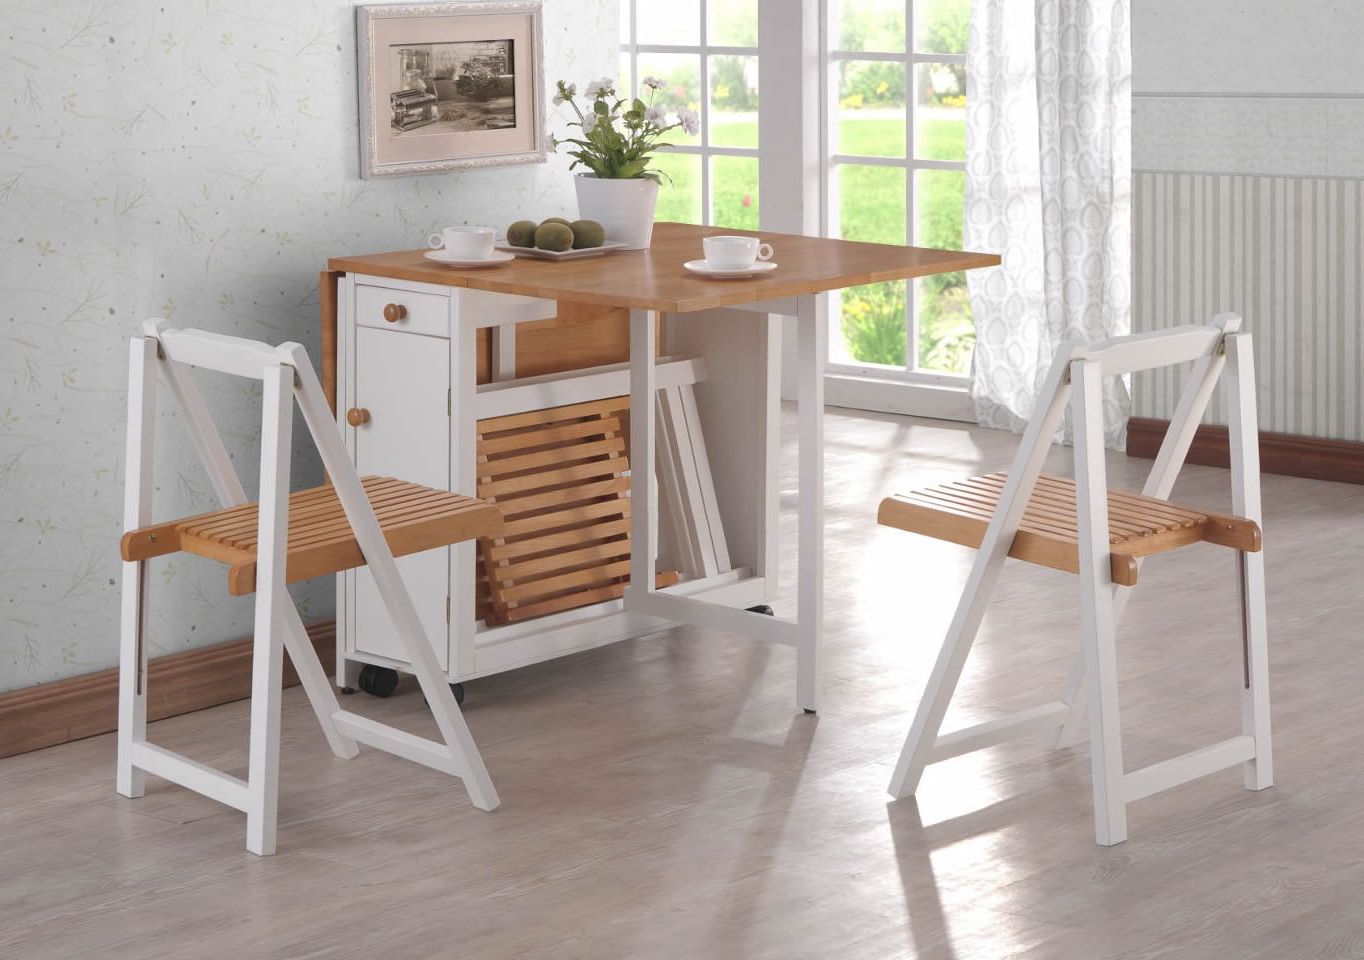 Cheap Folding Chairs And Tables